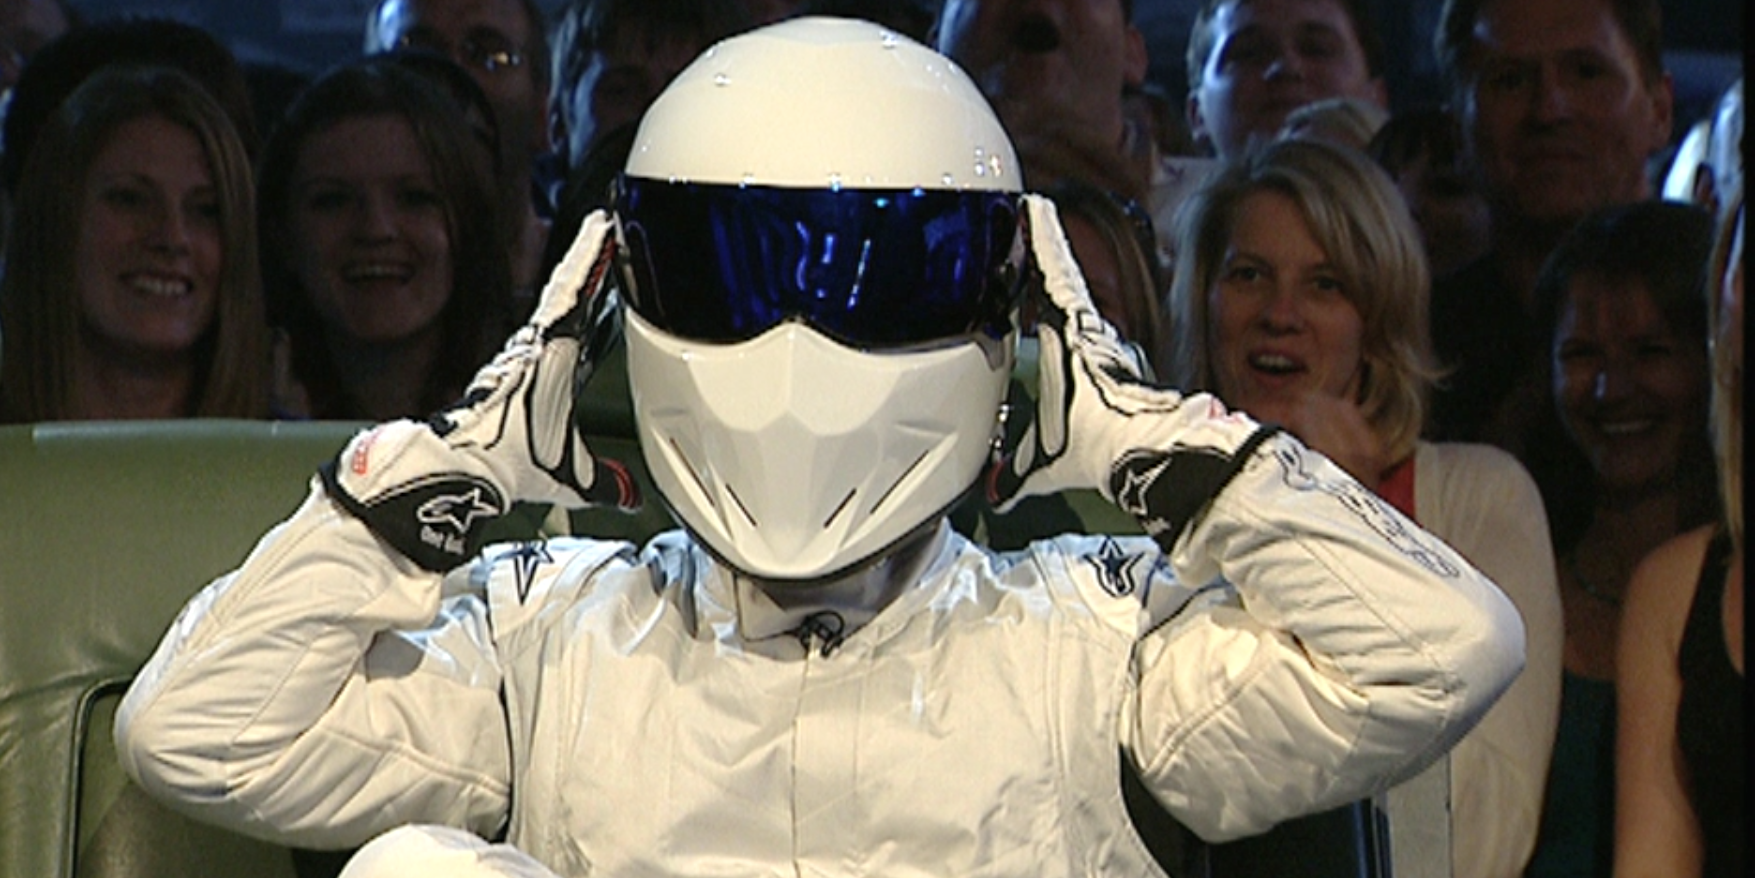 The Stig preparing to take off their helmet on the couch on Top Gear